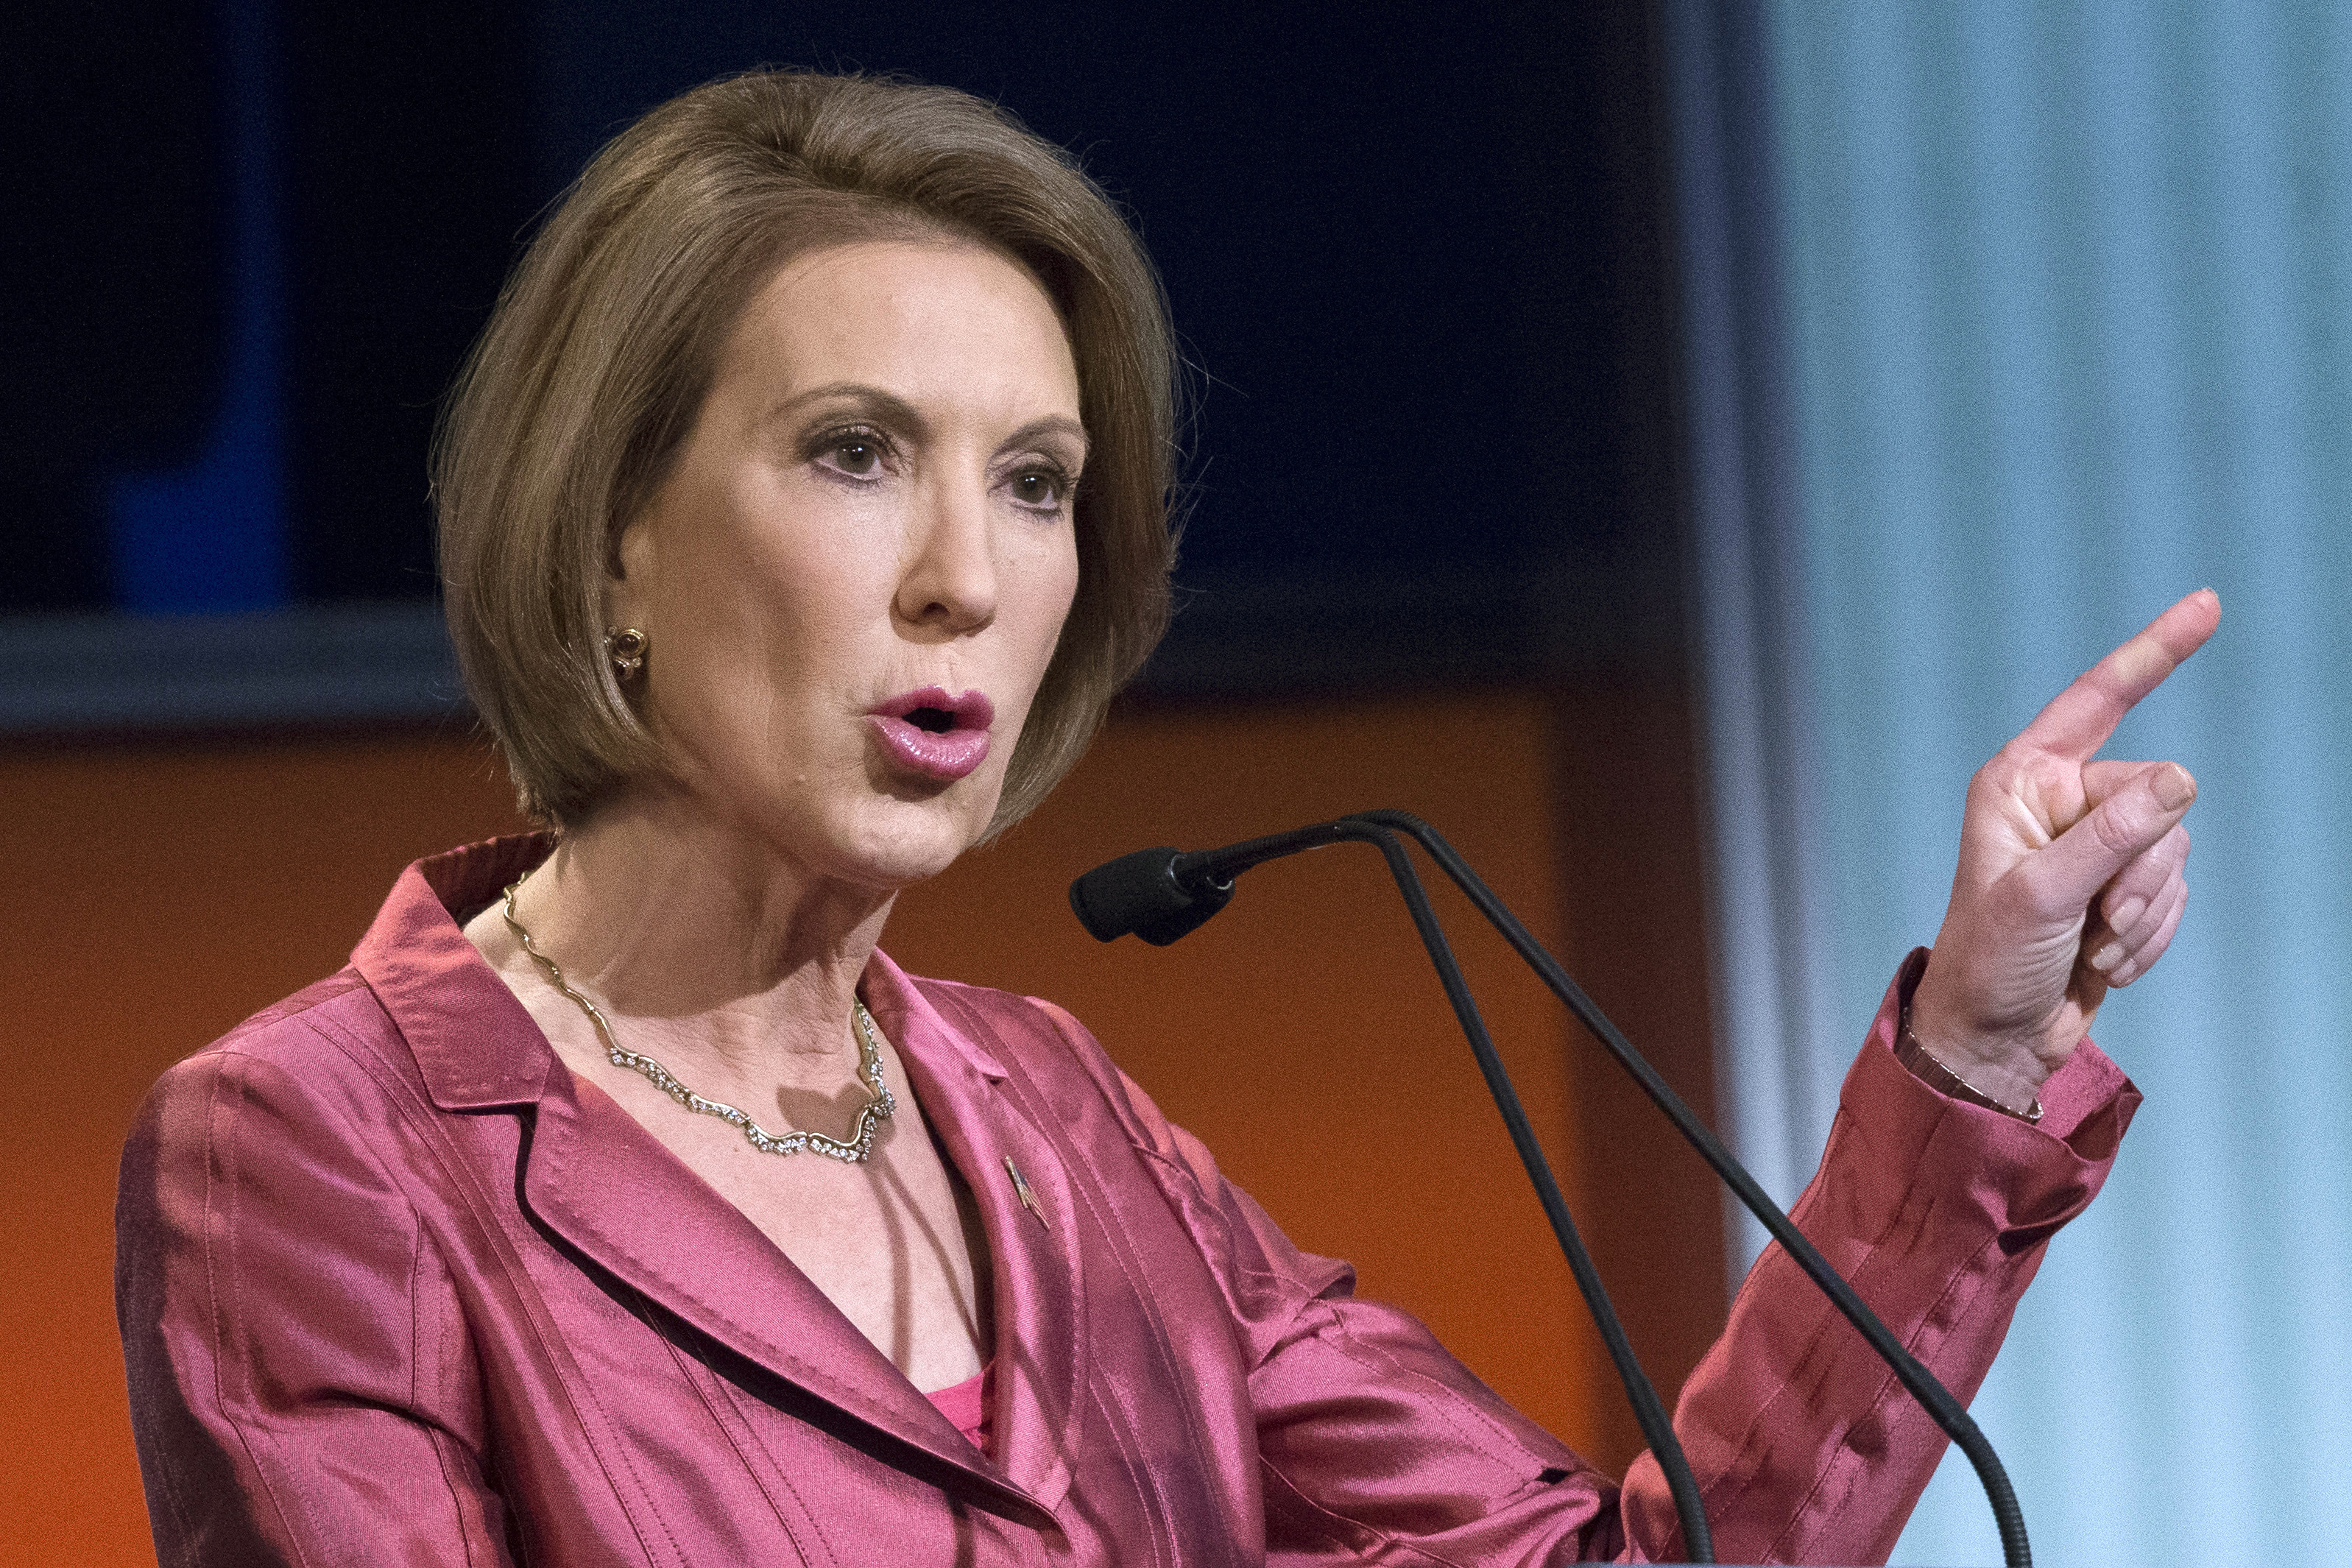 Republican presidential candidate Carly Fiorina speaks during a predebate forum in Cleveland on Aug. 6, 2015 (John Minchillo—AP)